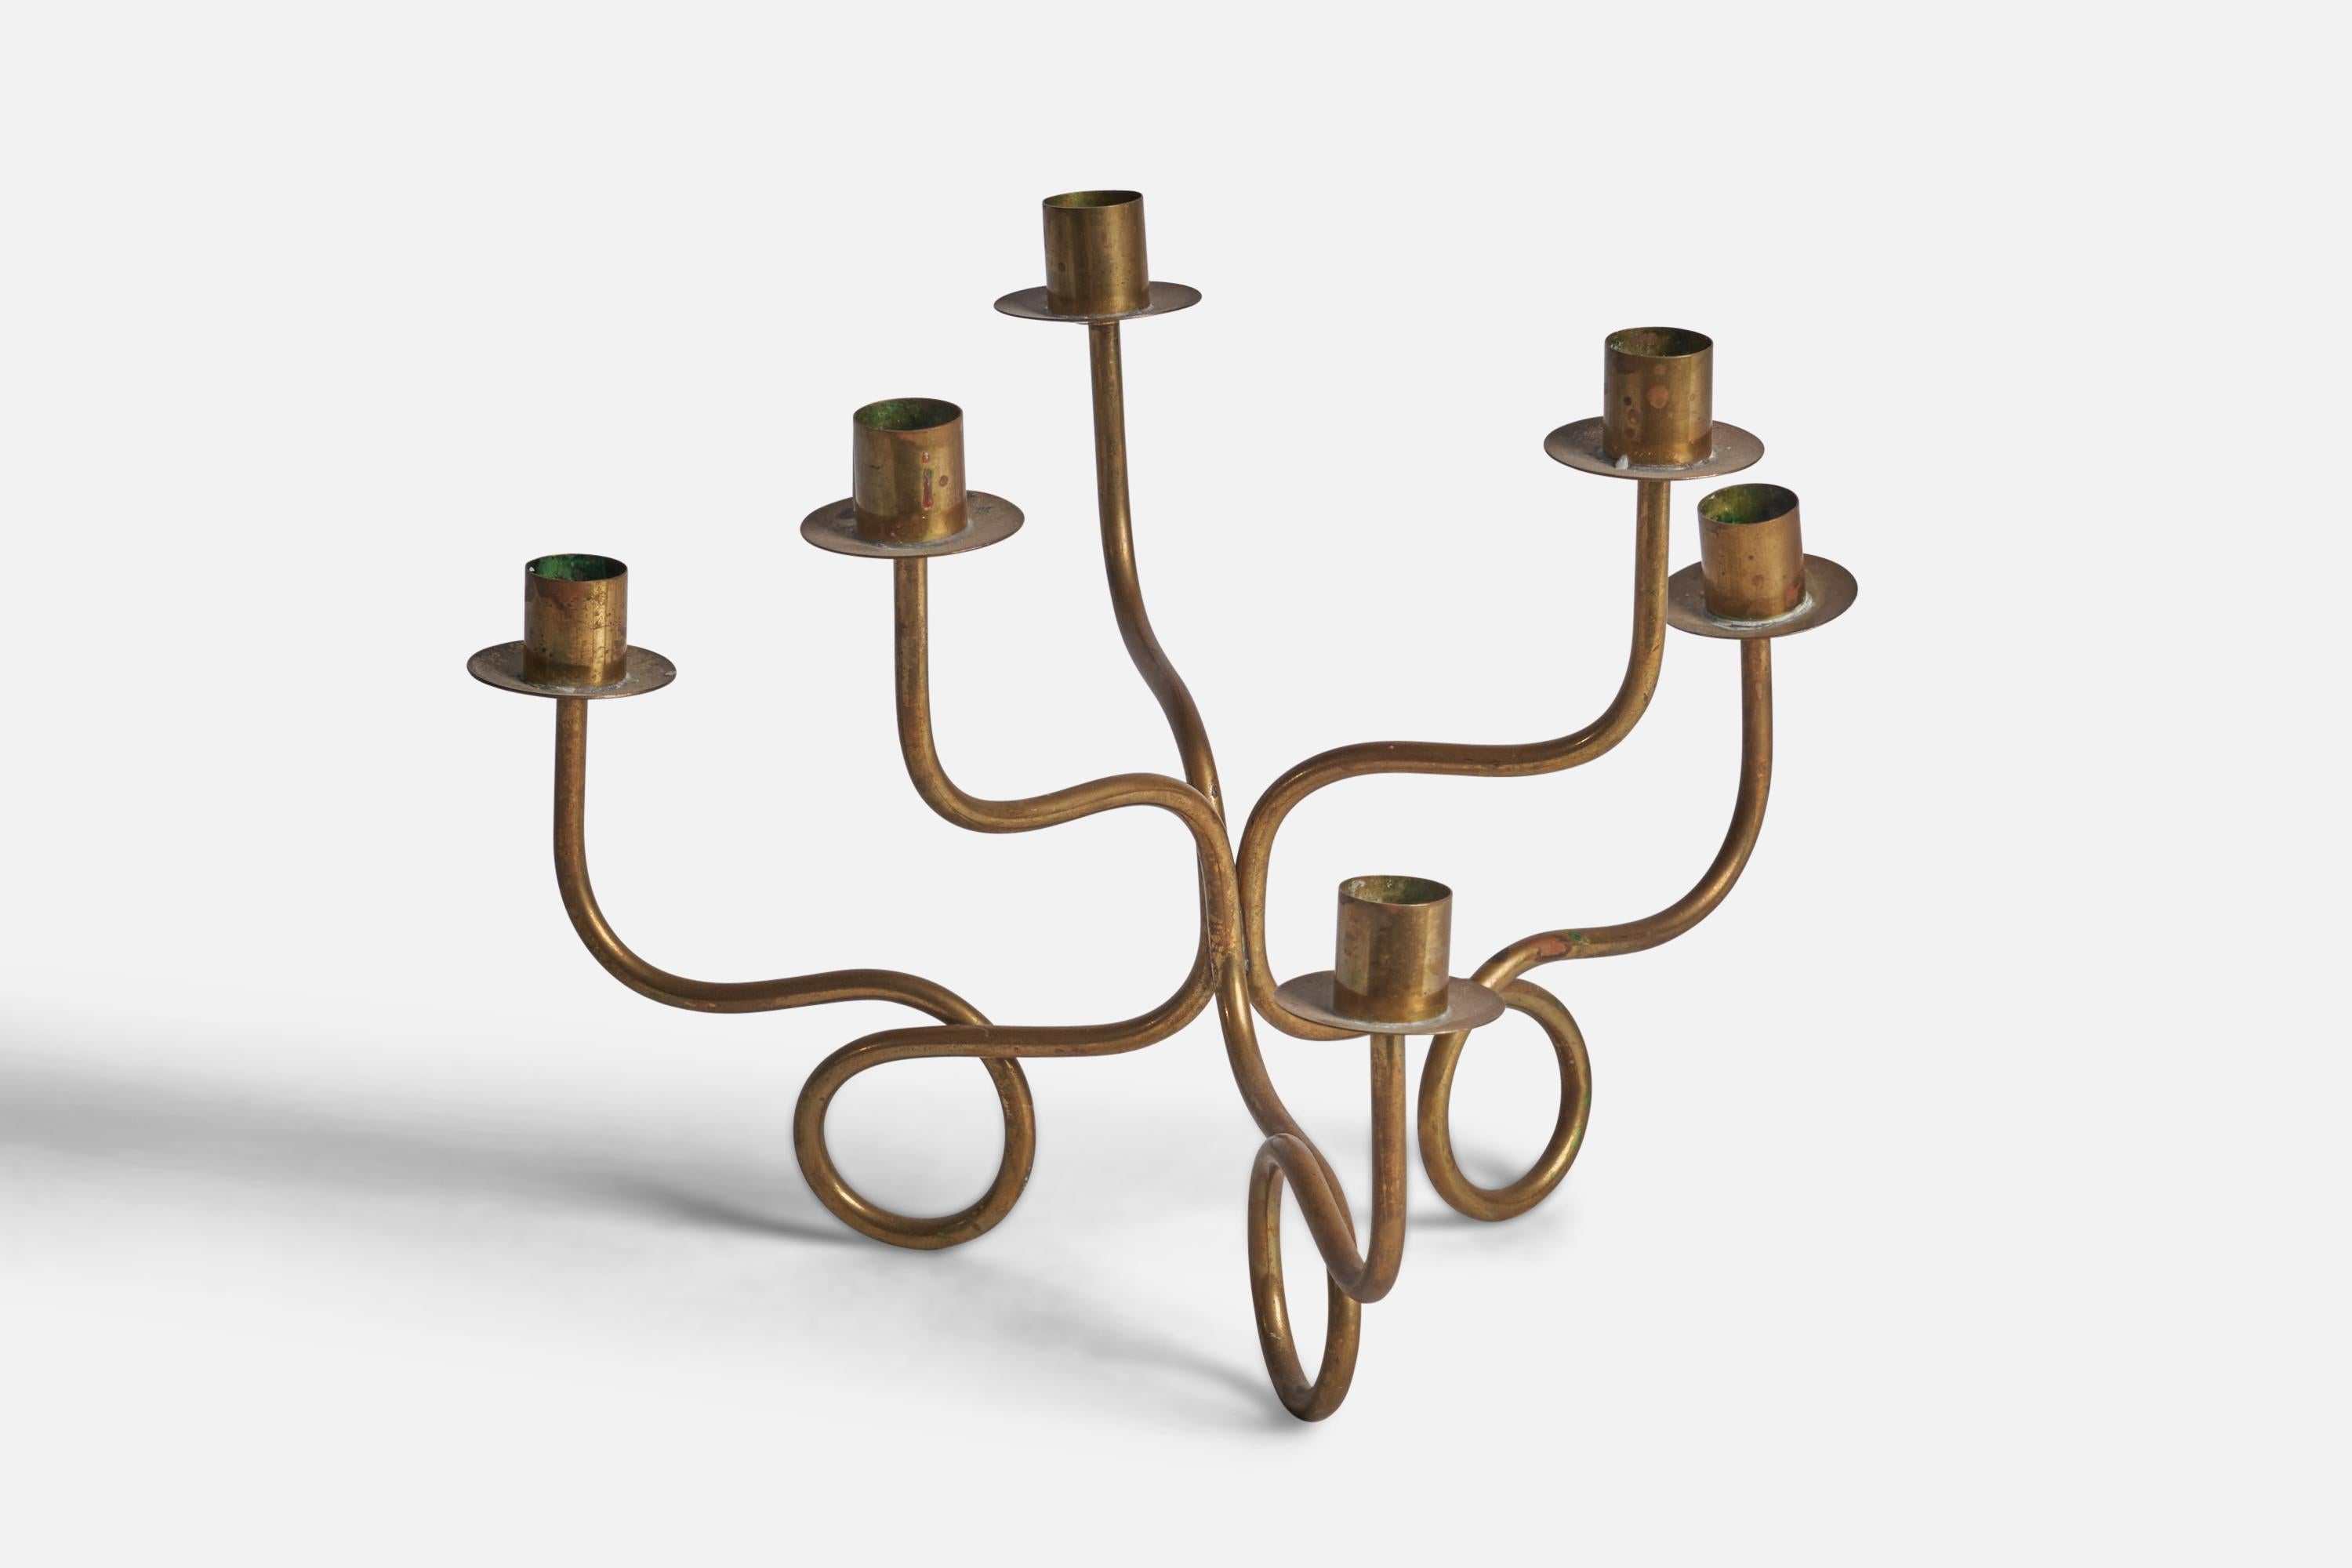 A six-armed organic brass candelabra designed by Josef Frank and produced by Svenskt Tenn, Sweden, 1940s.

Fits 0.80” diameter candles